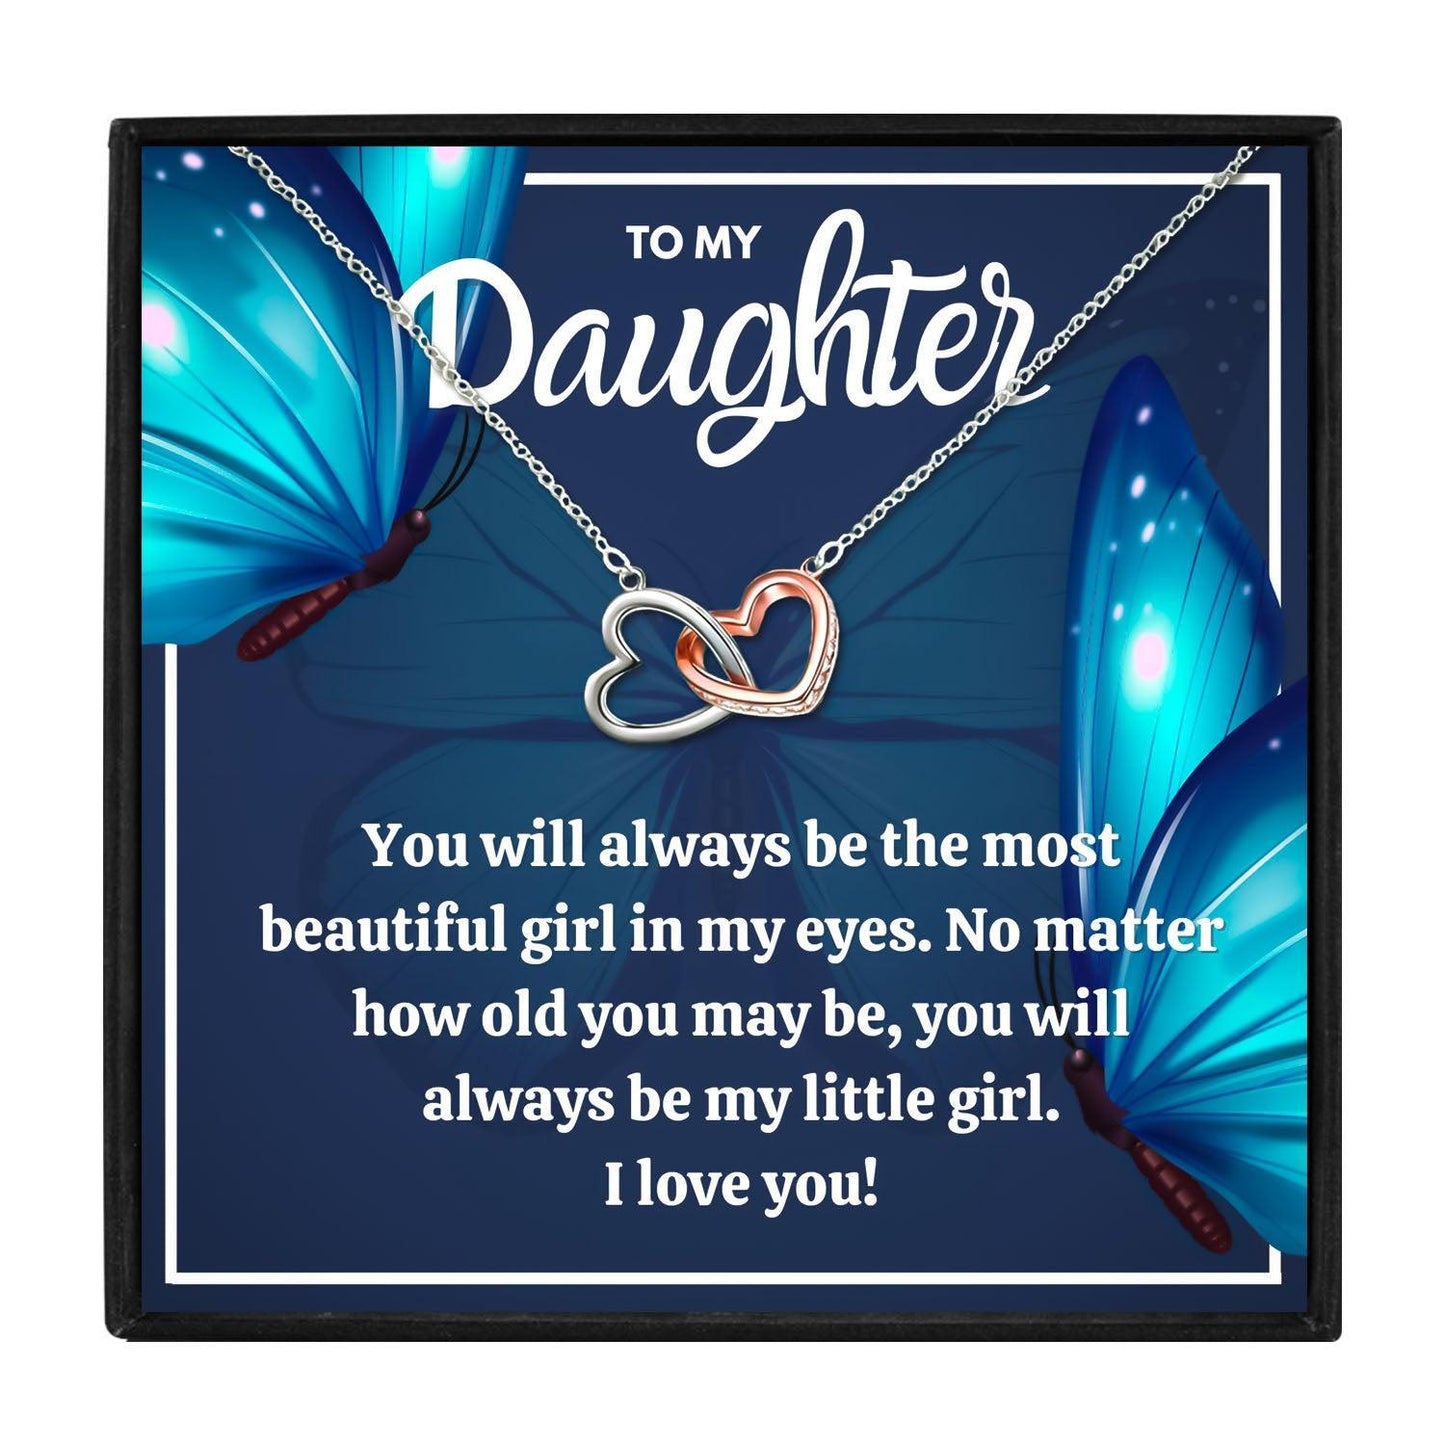 Mum & Daughter Double Heart Necklace for Christmas 2023 | Mum & Daughter Double Heart Necklace - undefined | daughter gift ideas, Daughter Necklace, daughter necklaces, Gift Necklace, Mother Daughter, Mother Daughter Gift Necklace, Mother Daughter Necklace, Mother Daughter Wedding Gift | From Hunny Life | hunnylife.com